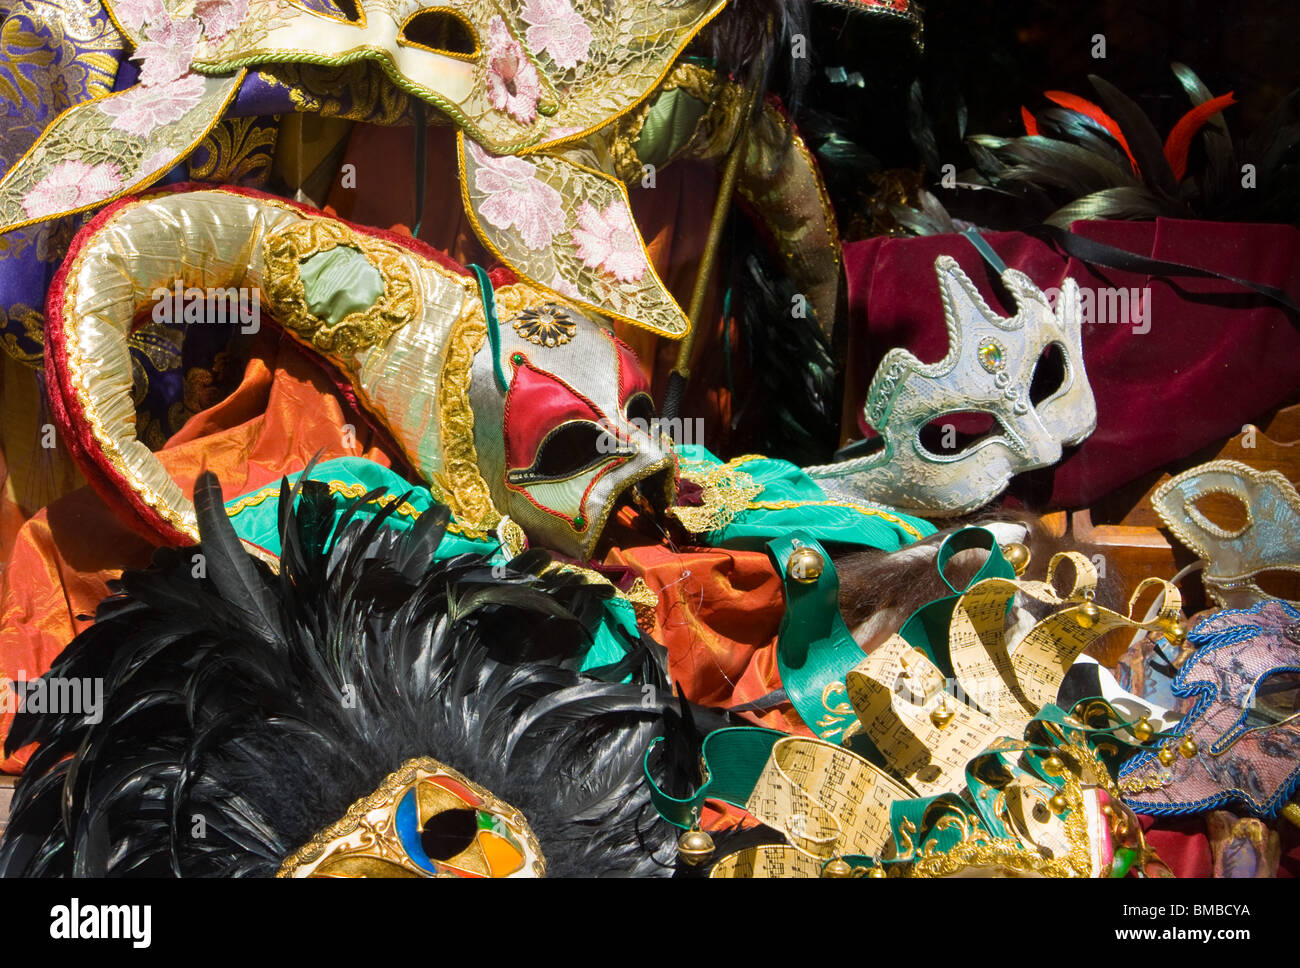 CARNIVAL MASKS   WINDOW DISPLAY IN SHOP Stock Photo